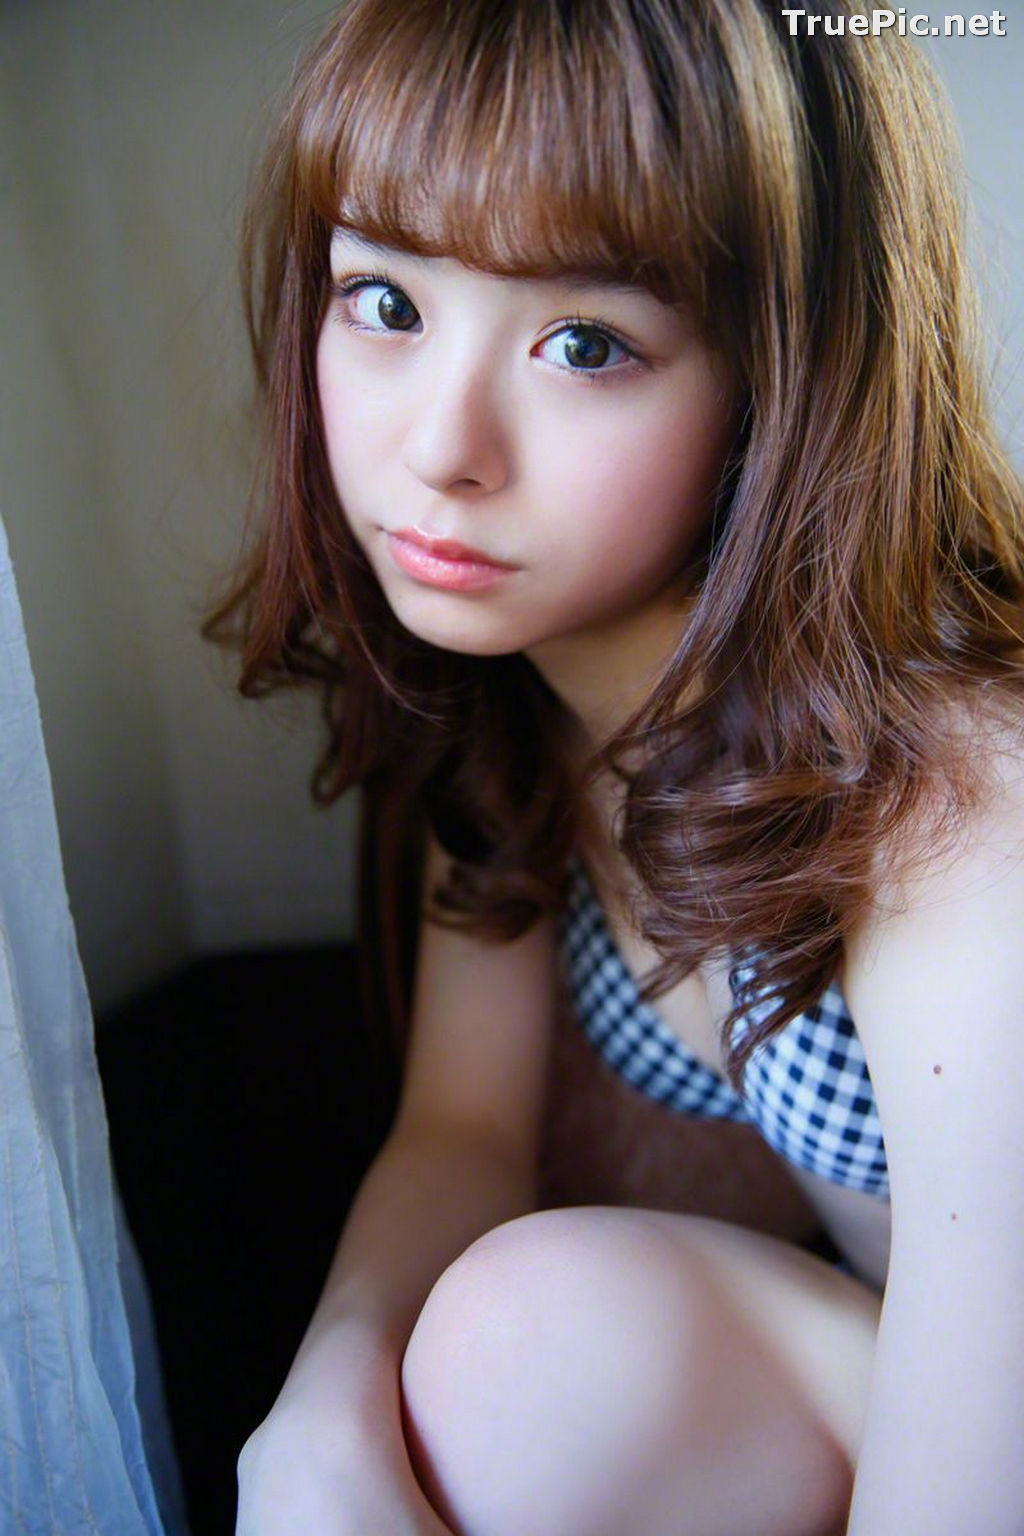 Image Wanibooks No.139-140 - Japanese Voice Actress and Singer - Rena Sato - TruePic.net - Picture-113